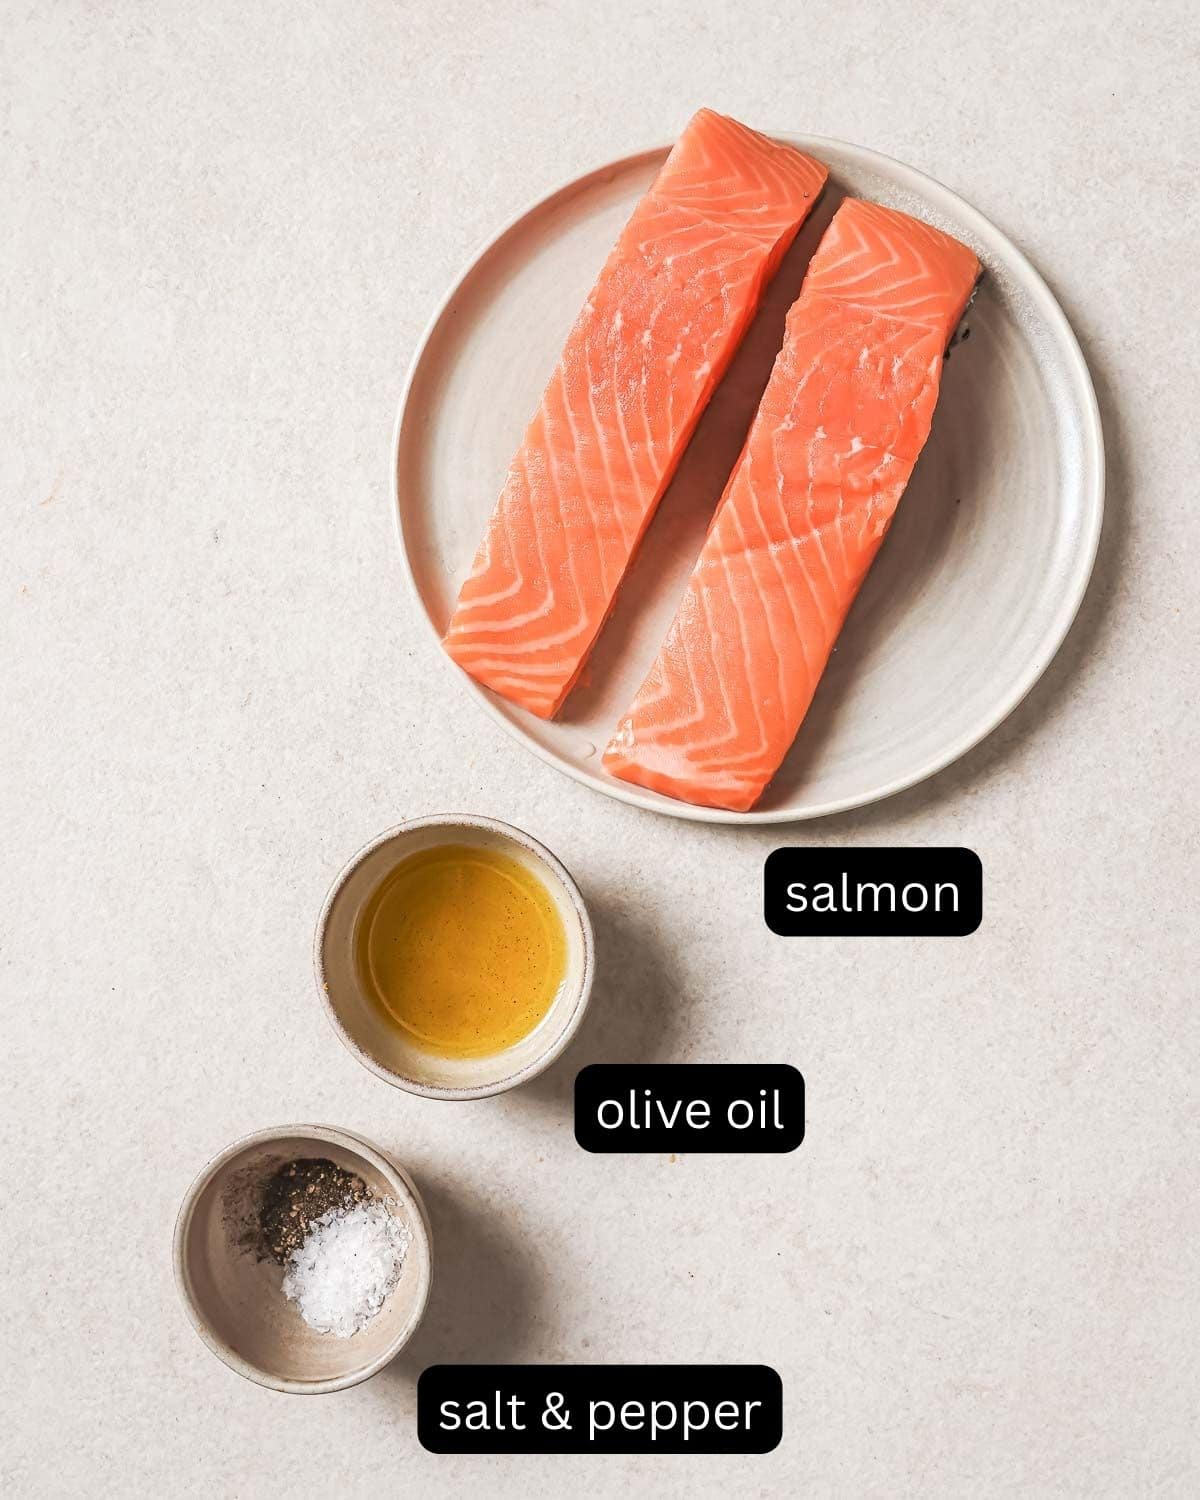 Salmon fillets with olive oil, salt, and pepper on a countertop.